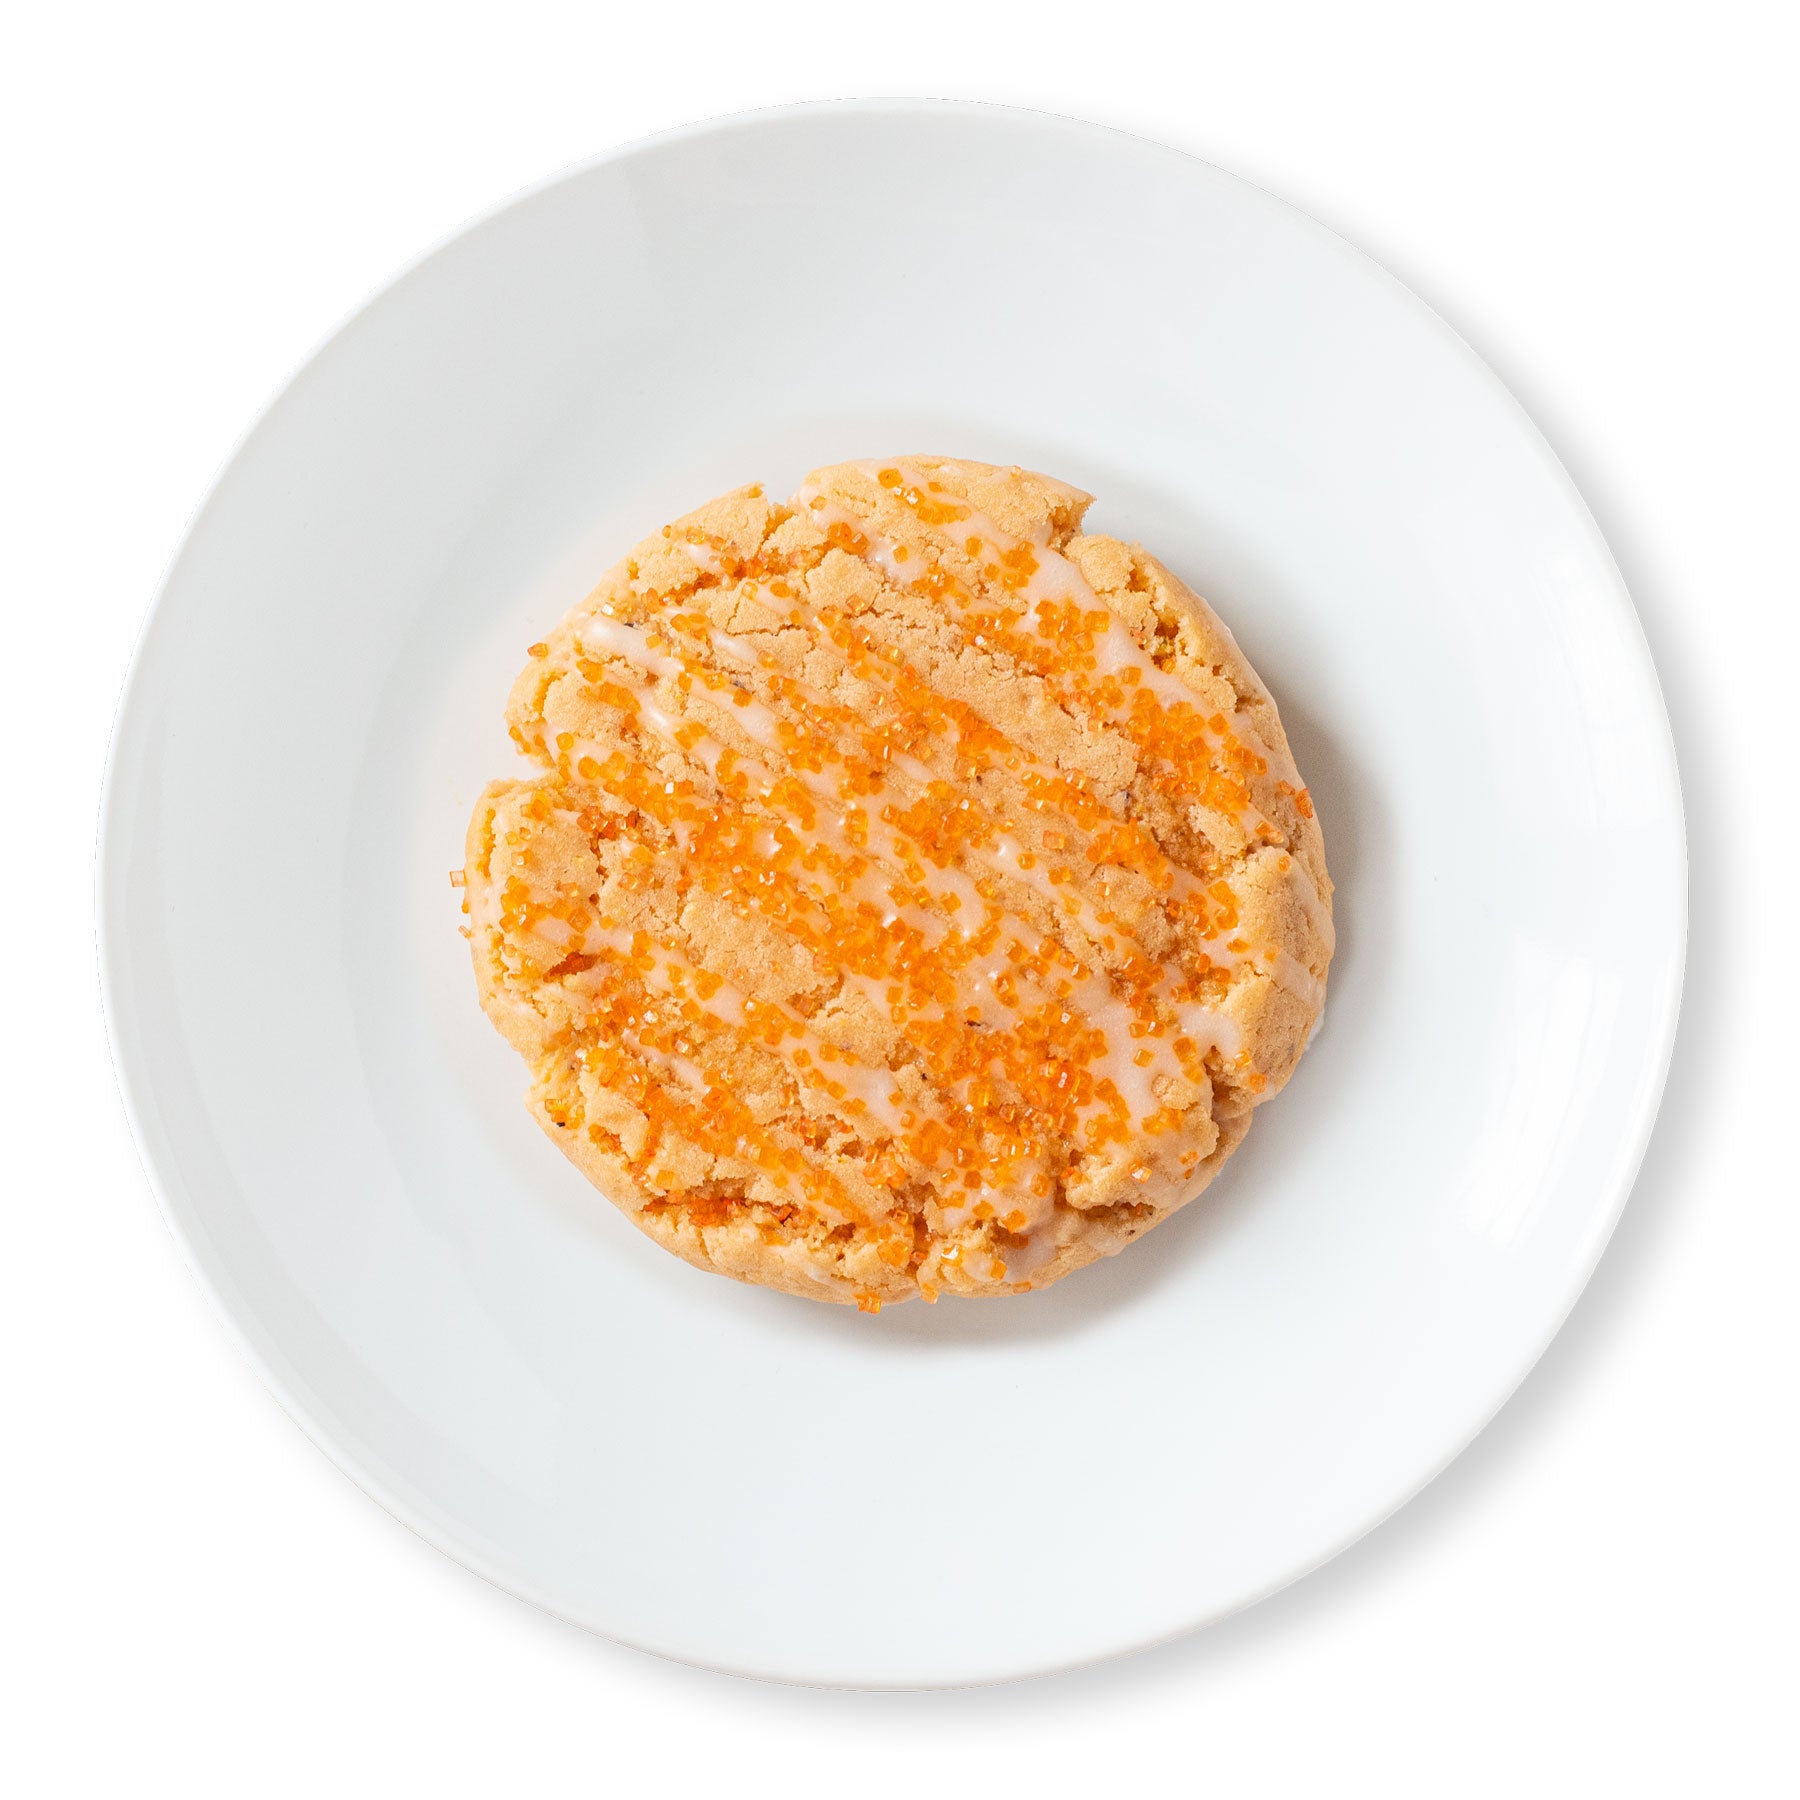 A close-up image of a Mimosa Cookie with champagne glaze and orange sanding sugar.